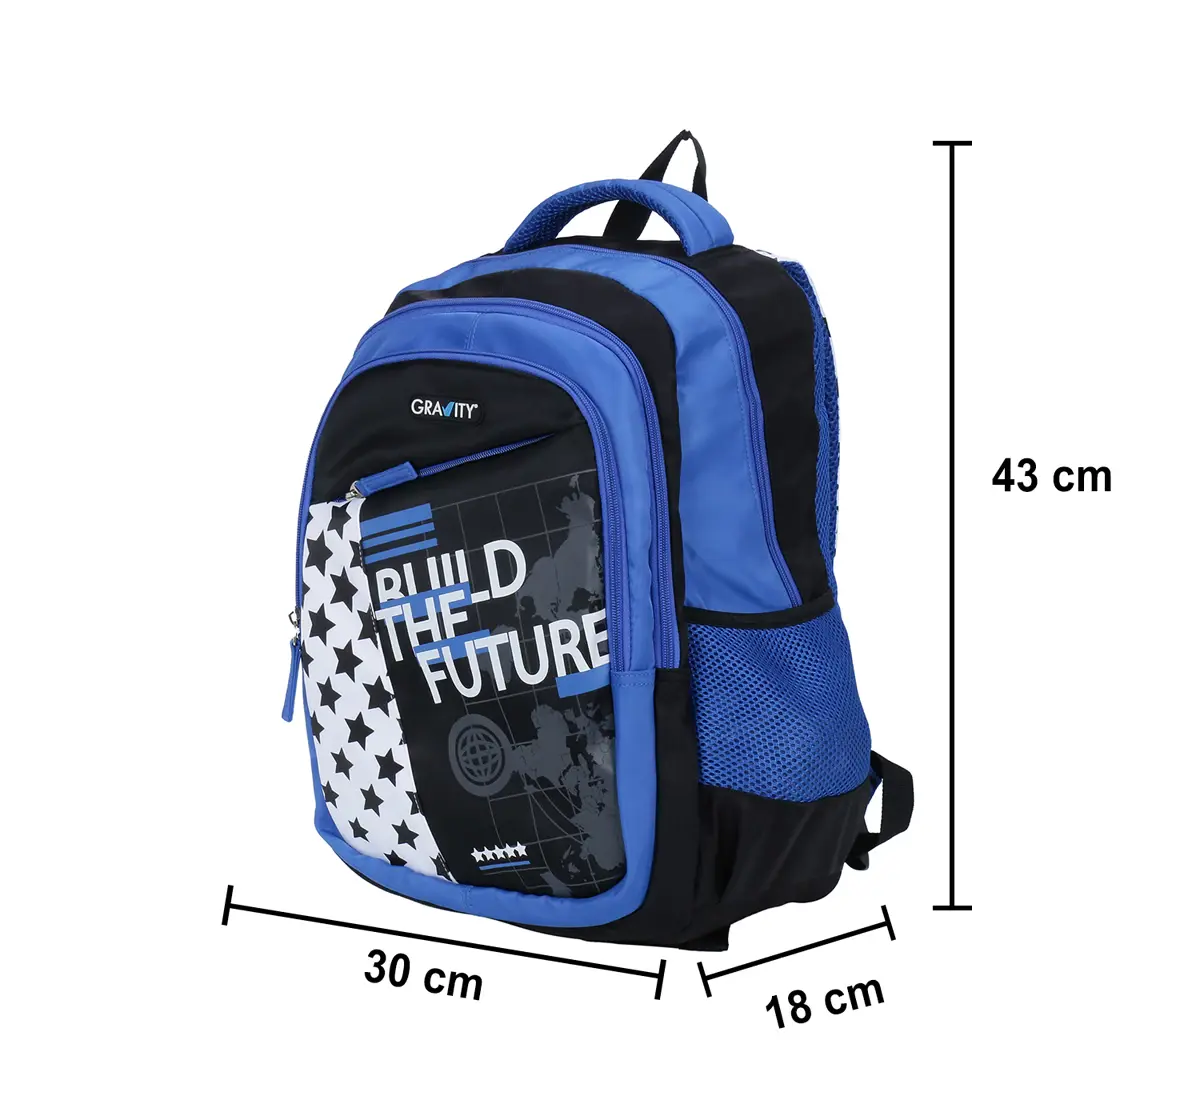 Simba Gravity Build The Future 17 Backpack Multicolor 3Y+